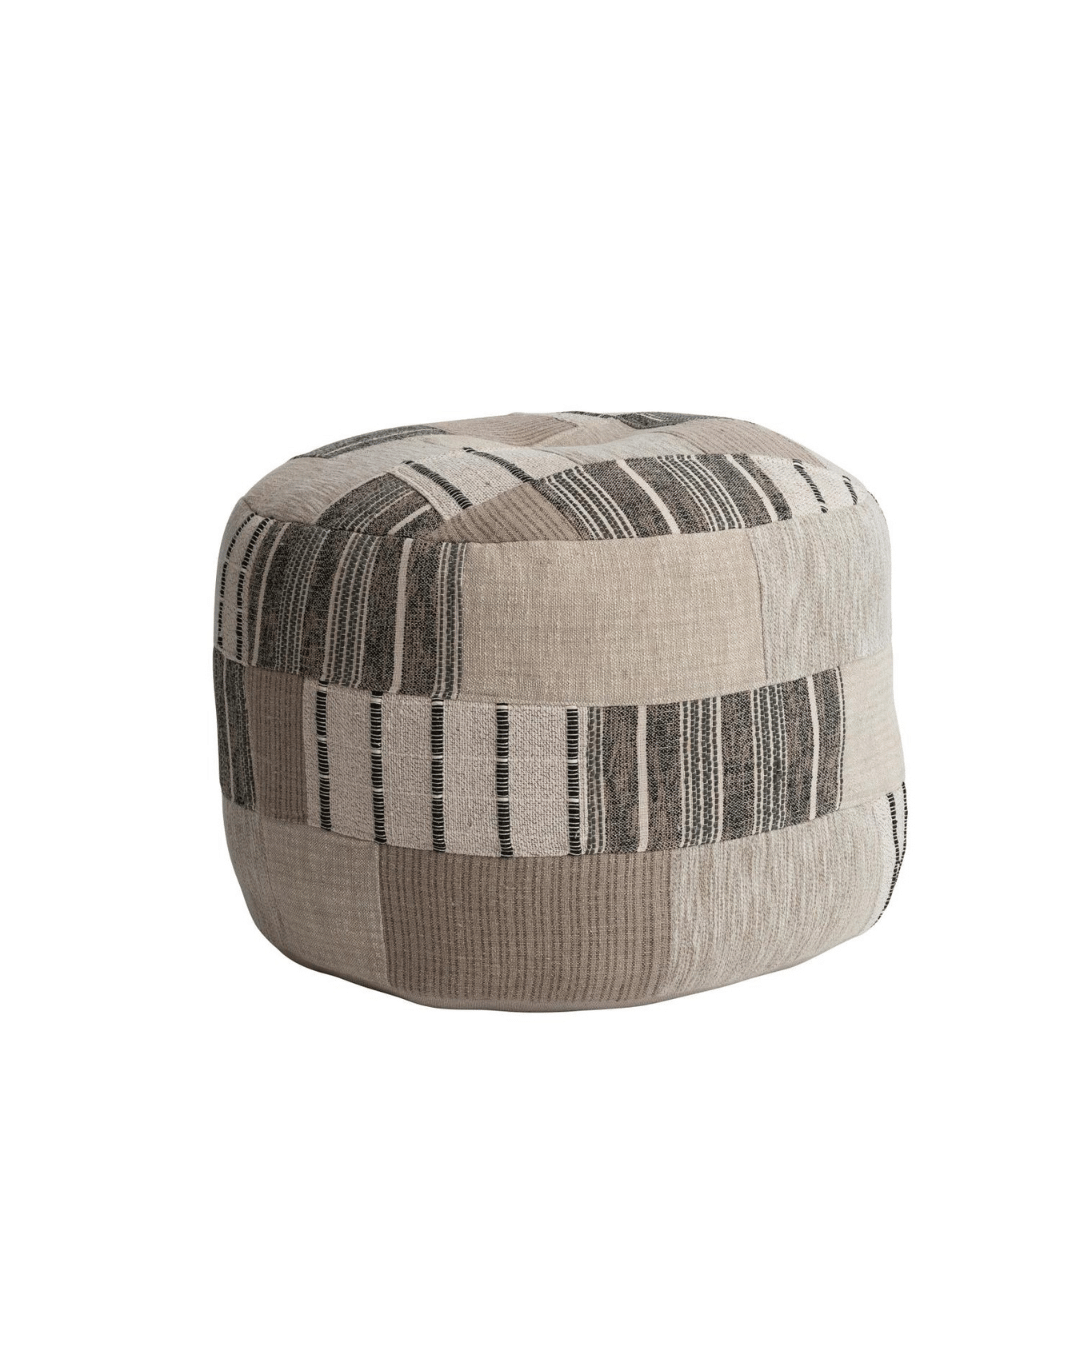 A Slub Patchwork Pouf, Neutral  24" Round x 18"H with a patchwork design in shades of beige, cream, and gray. The fabric features various striped and textured patterns, creating a visually interesting piece of furniture. This multi-color ottoman by Creative Co-op exudes cozy, rustic artisanal charm.